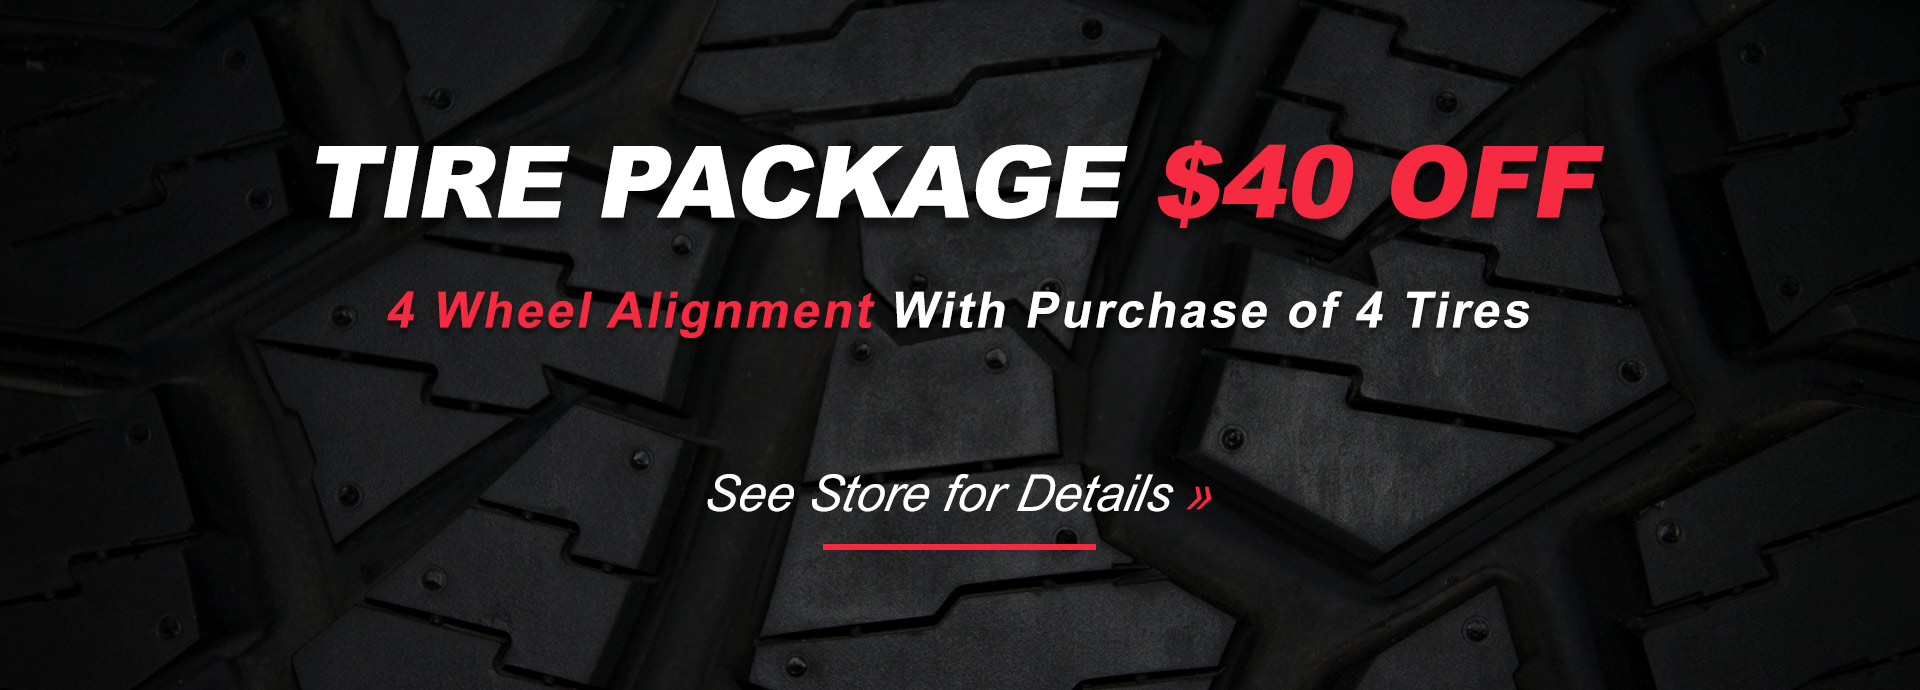 Tire Package $40 Off 4 Wheel Alignment 